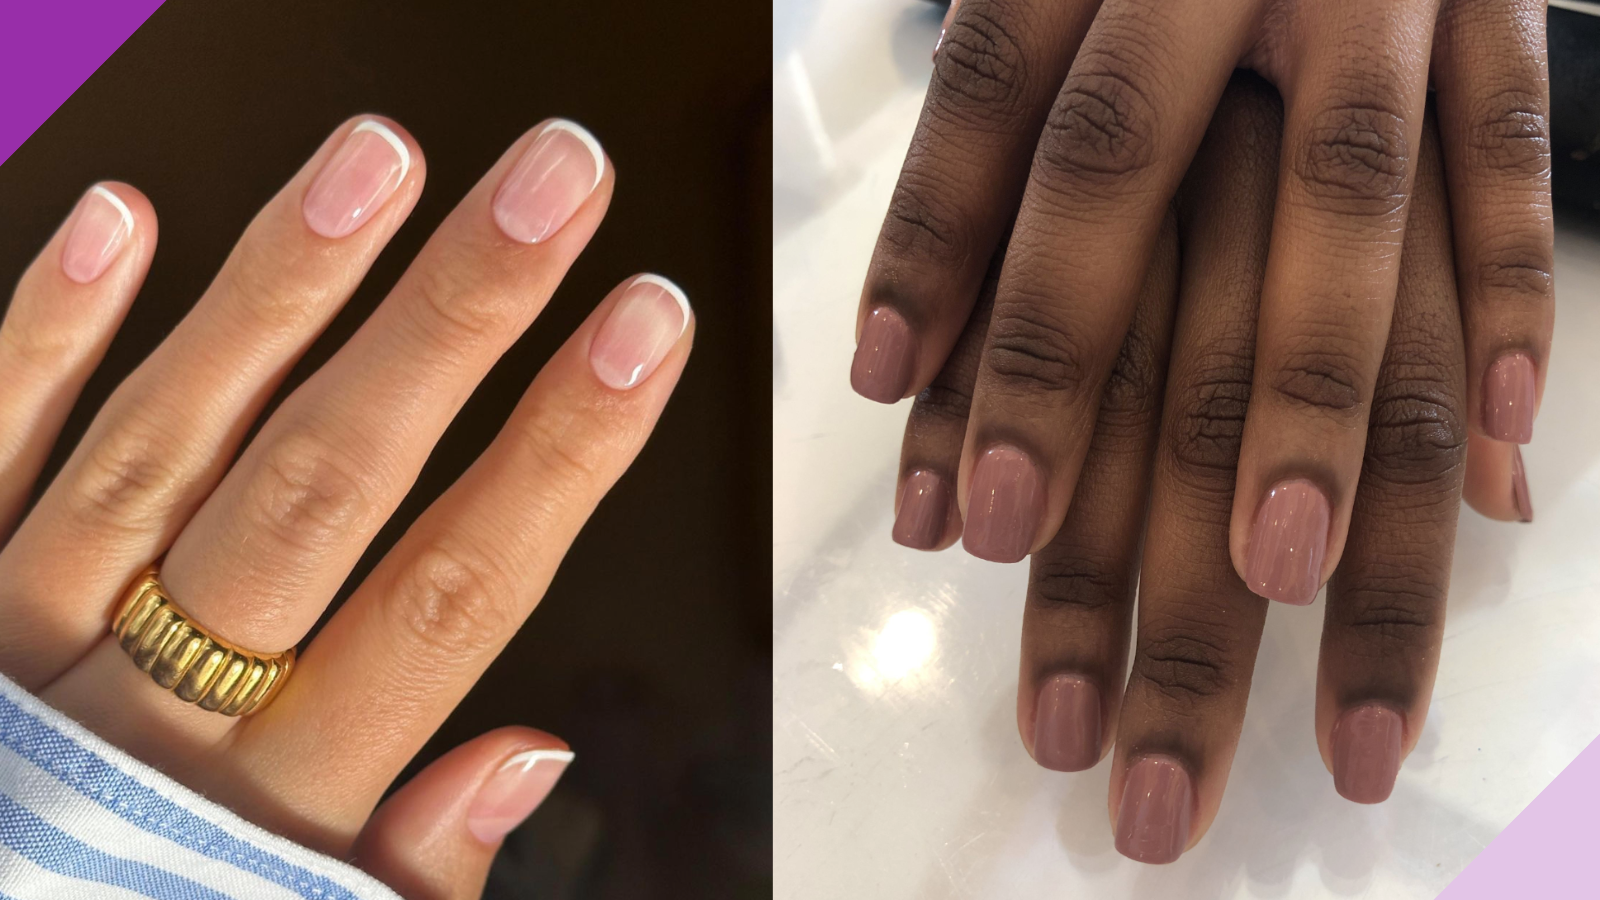 SNS Nails in MS22 mood changing color | Sns nails, Sns nails colors, Nail  colors